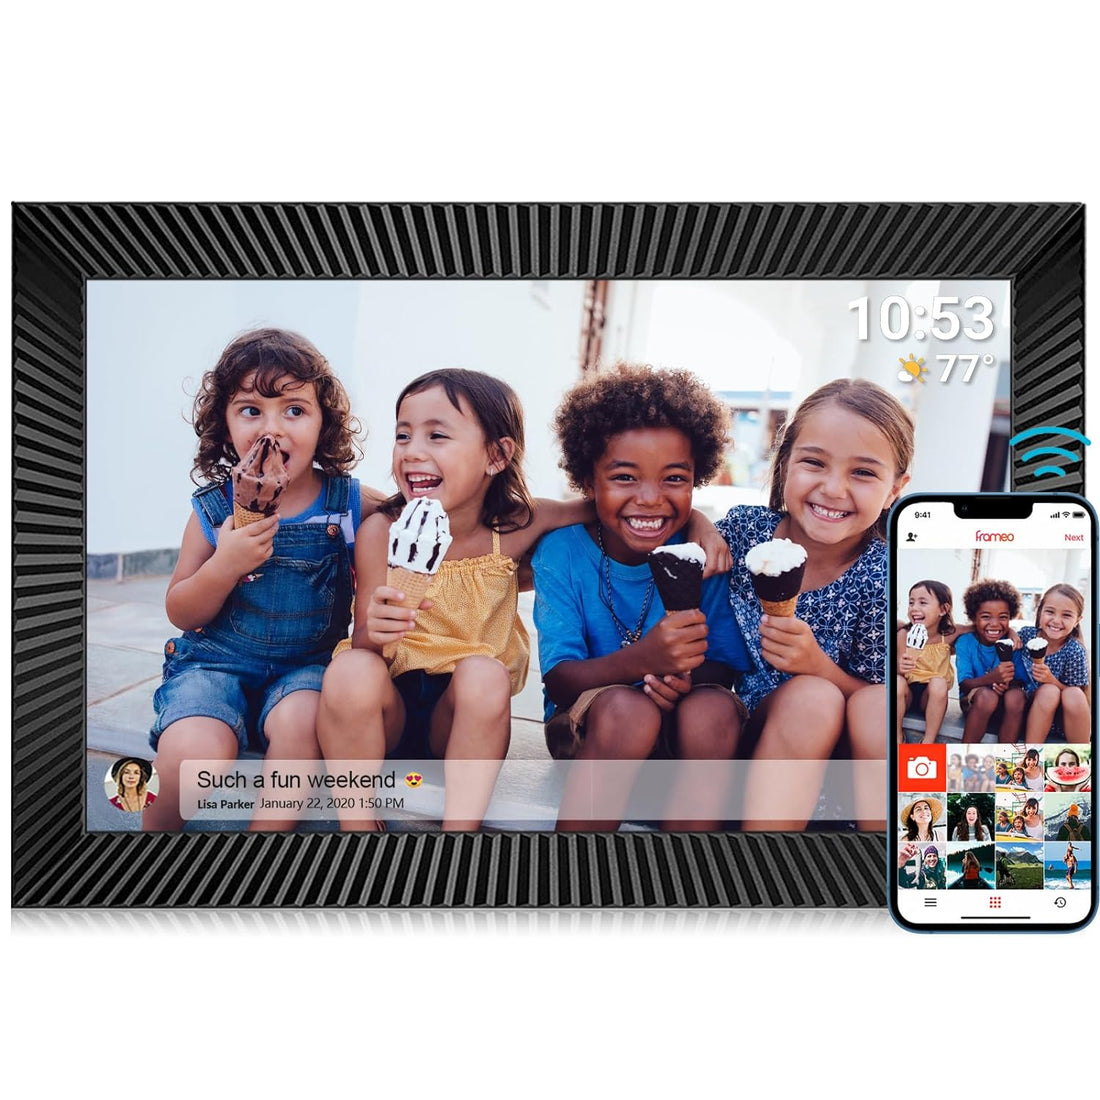 FRAMEO 10.1 inch WiFi Digital Picture Frame Smart Digital Photo Frame with IPS Touch Screen 1280x800 HD Electronic Picture Frame with 16GB Storage Share Photos and Videos Instantly via Frameo APP